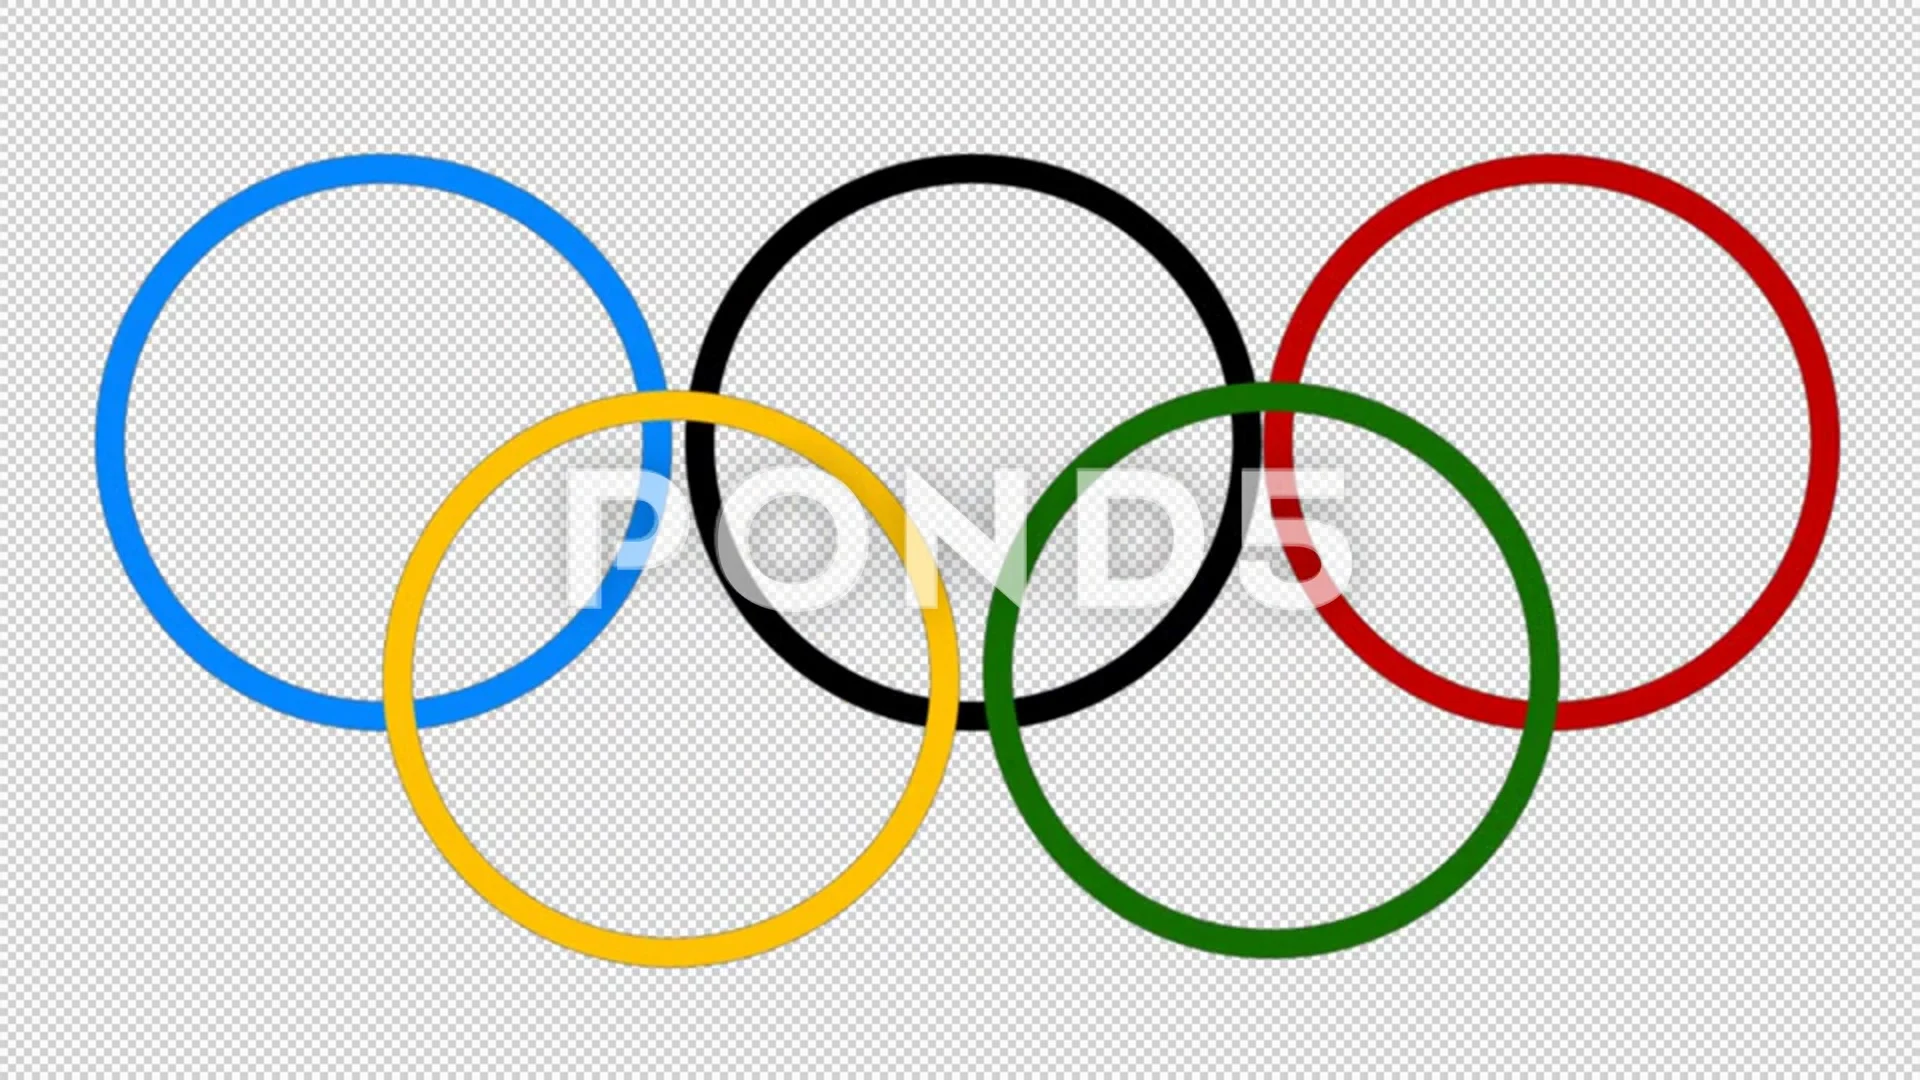 Flame olympic rings Royalty Free Vector Image - VectorStock